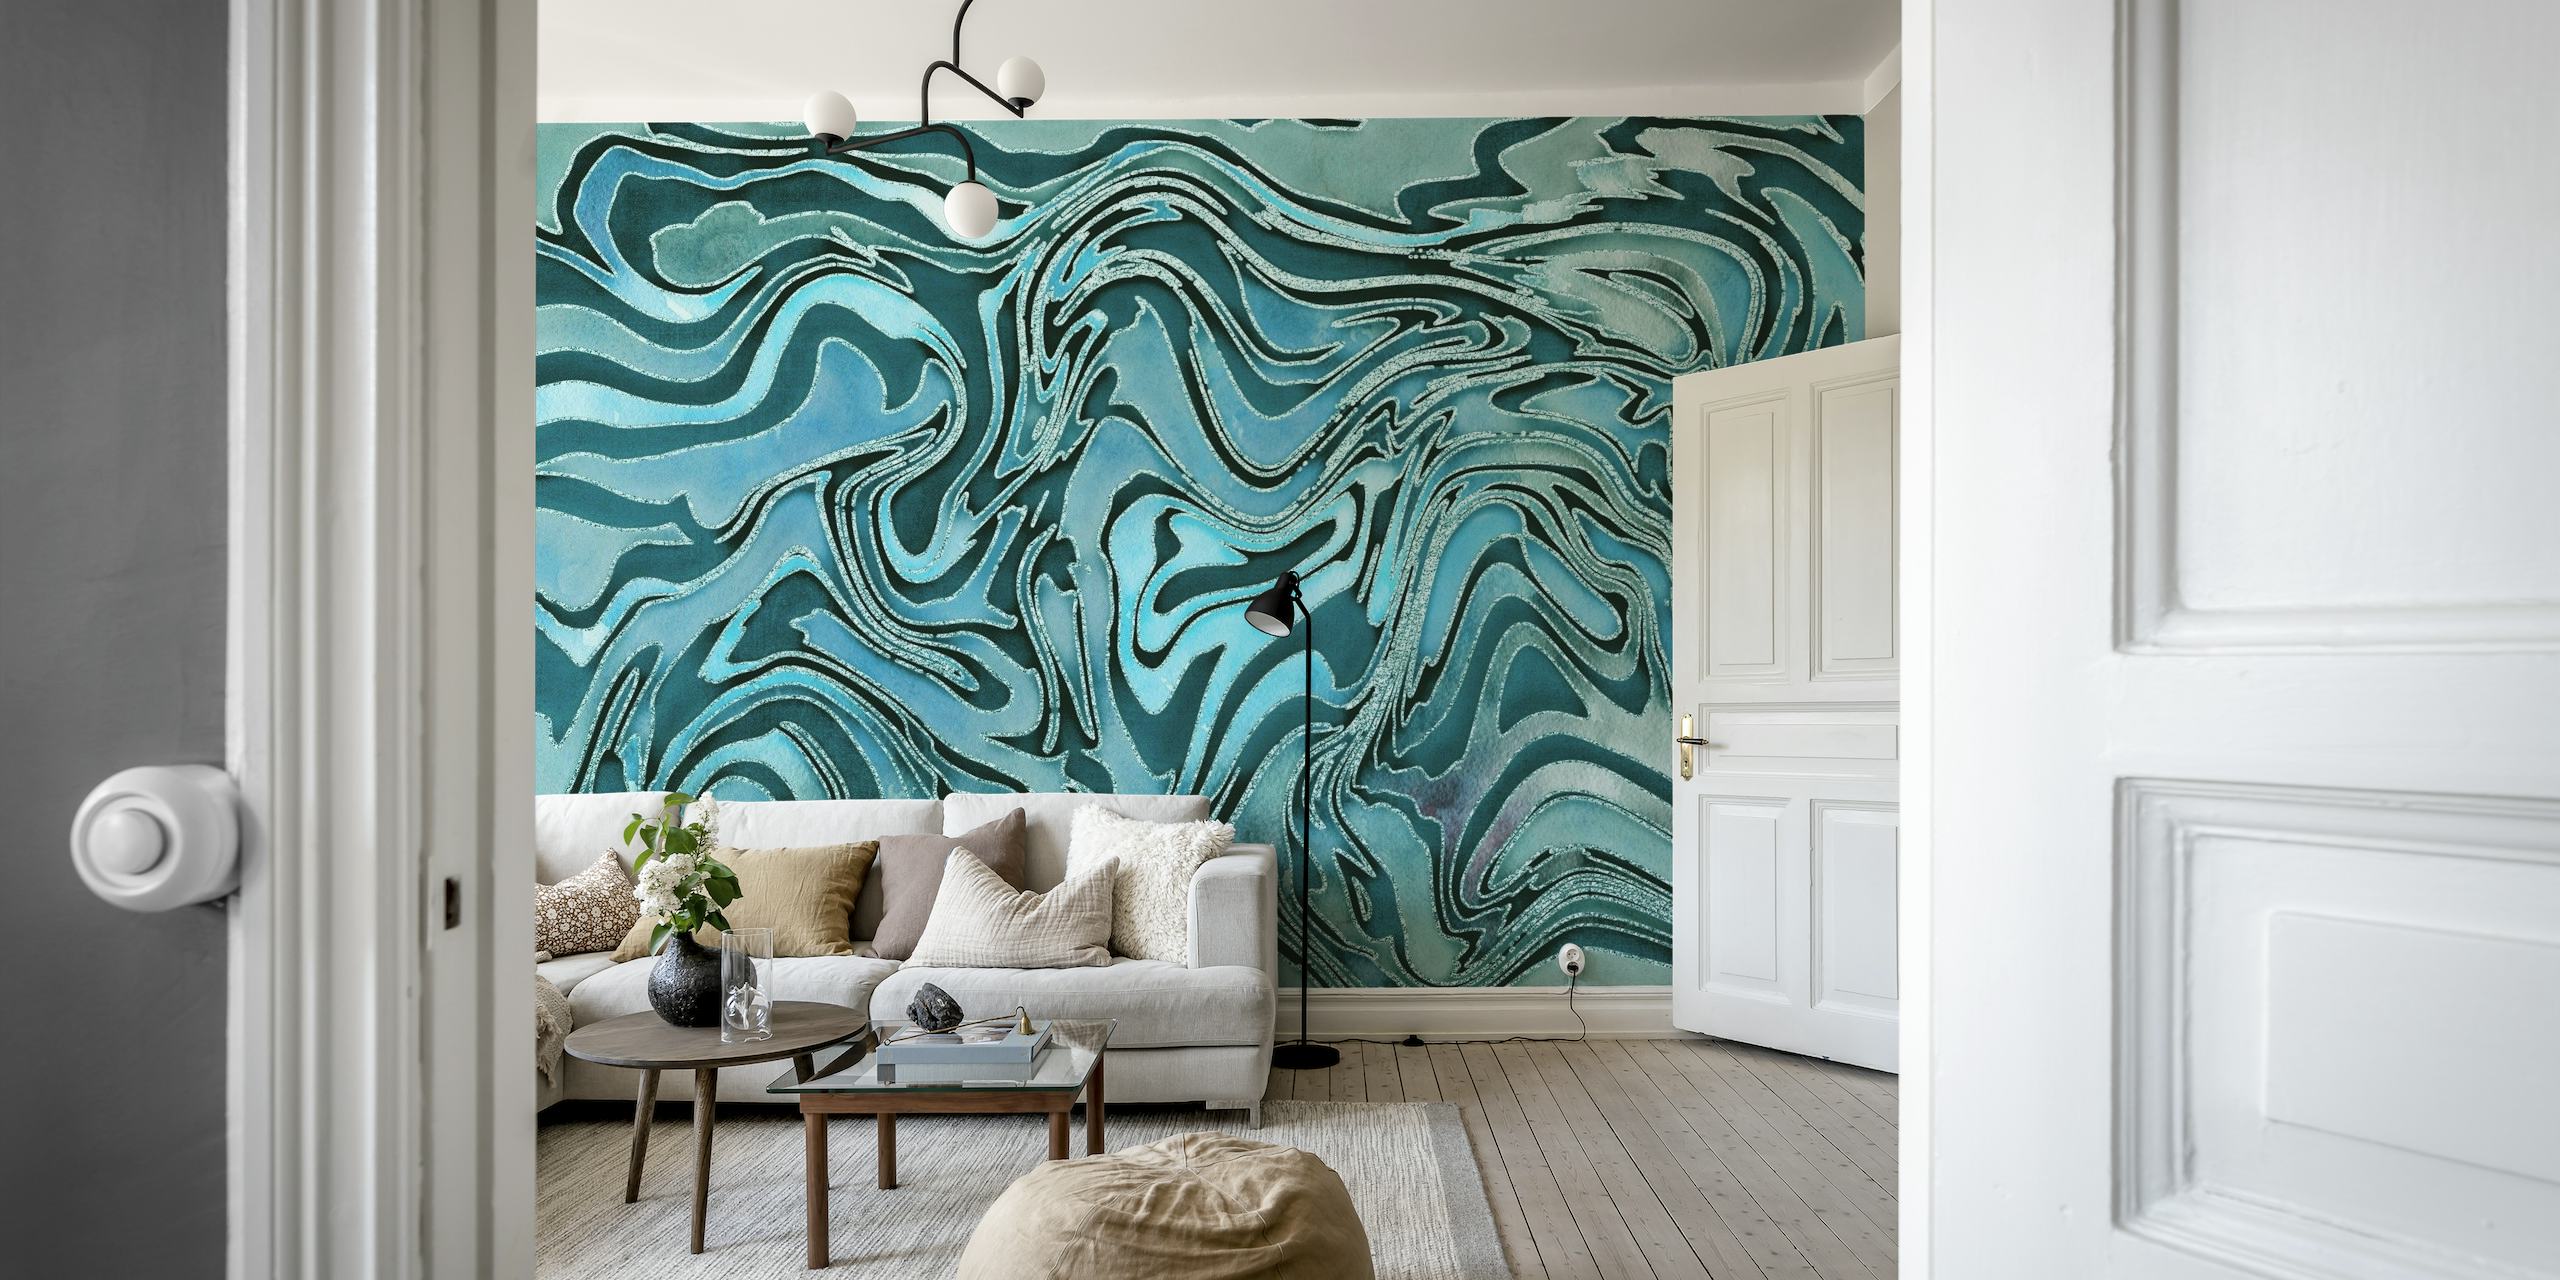 Liquid Teal Abstract Marble wall mural with swirling patterns of teal and turquoise resembling natural marble